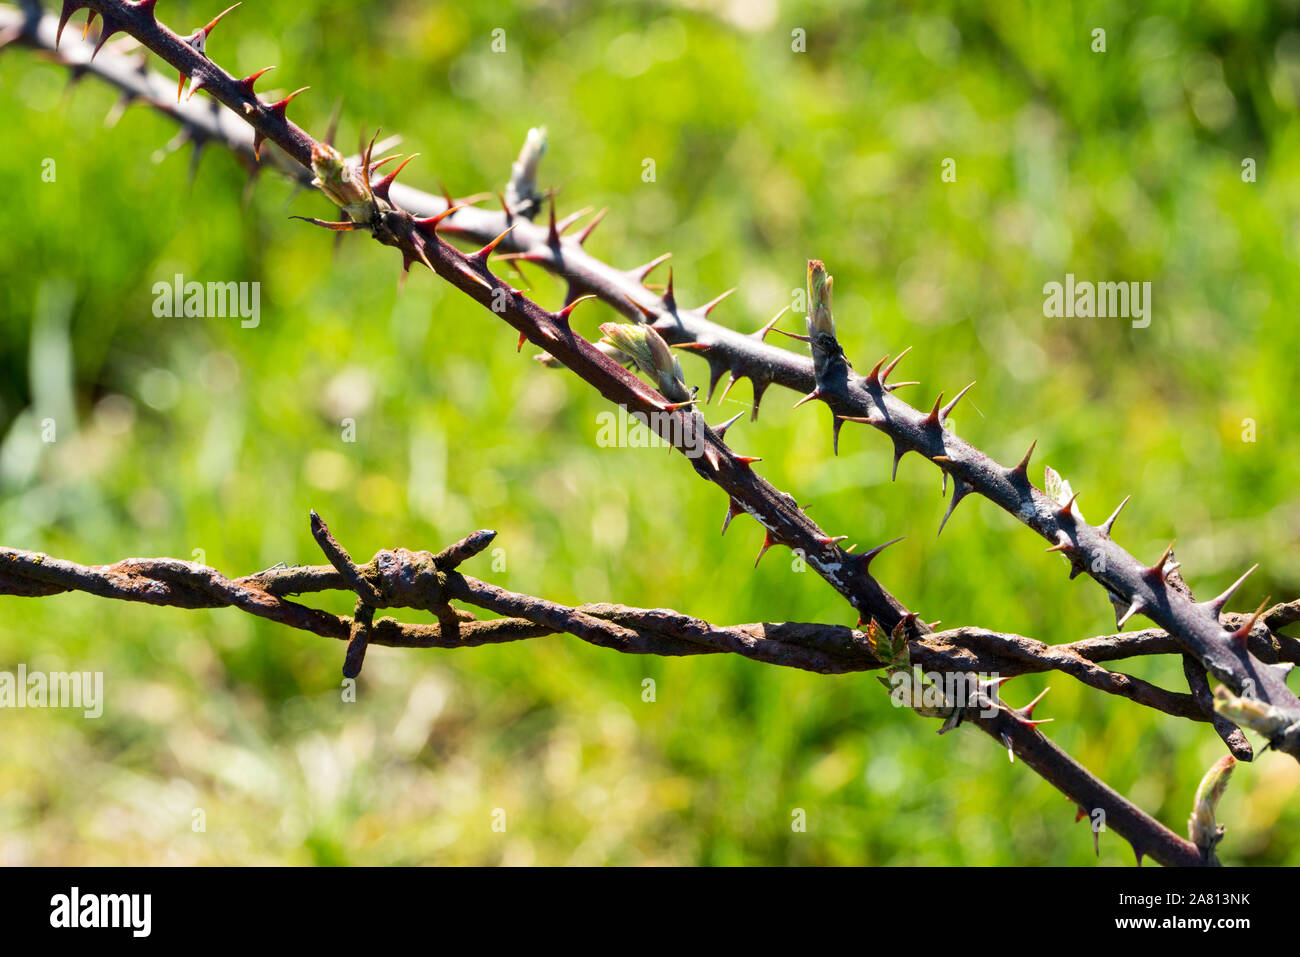 thorns and barbed wire, Stock Photo